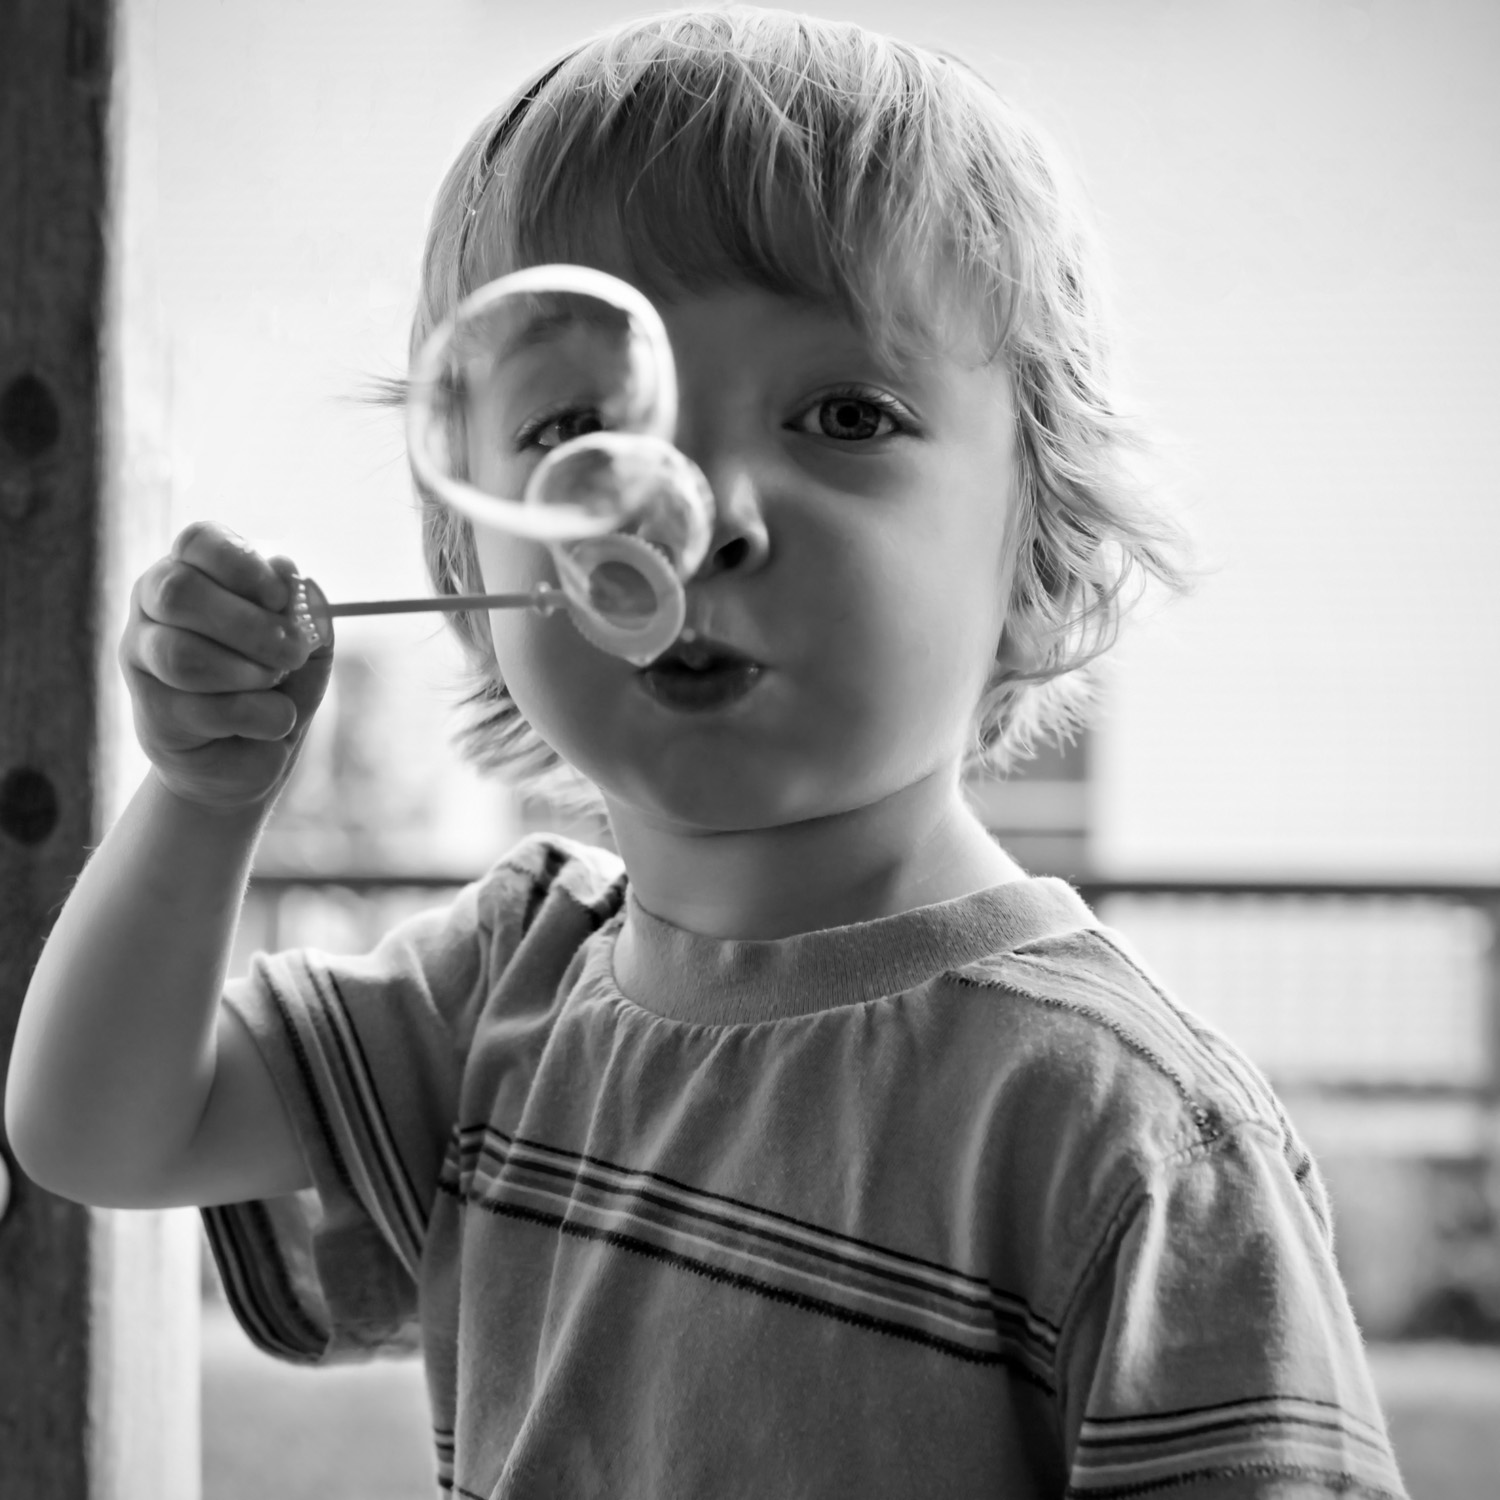 Blowing Bubbles (user submitted)